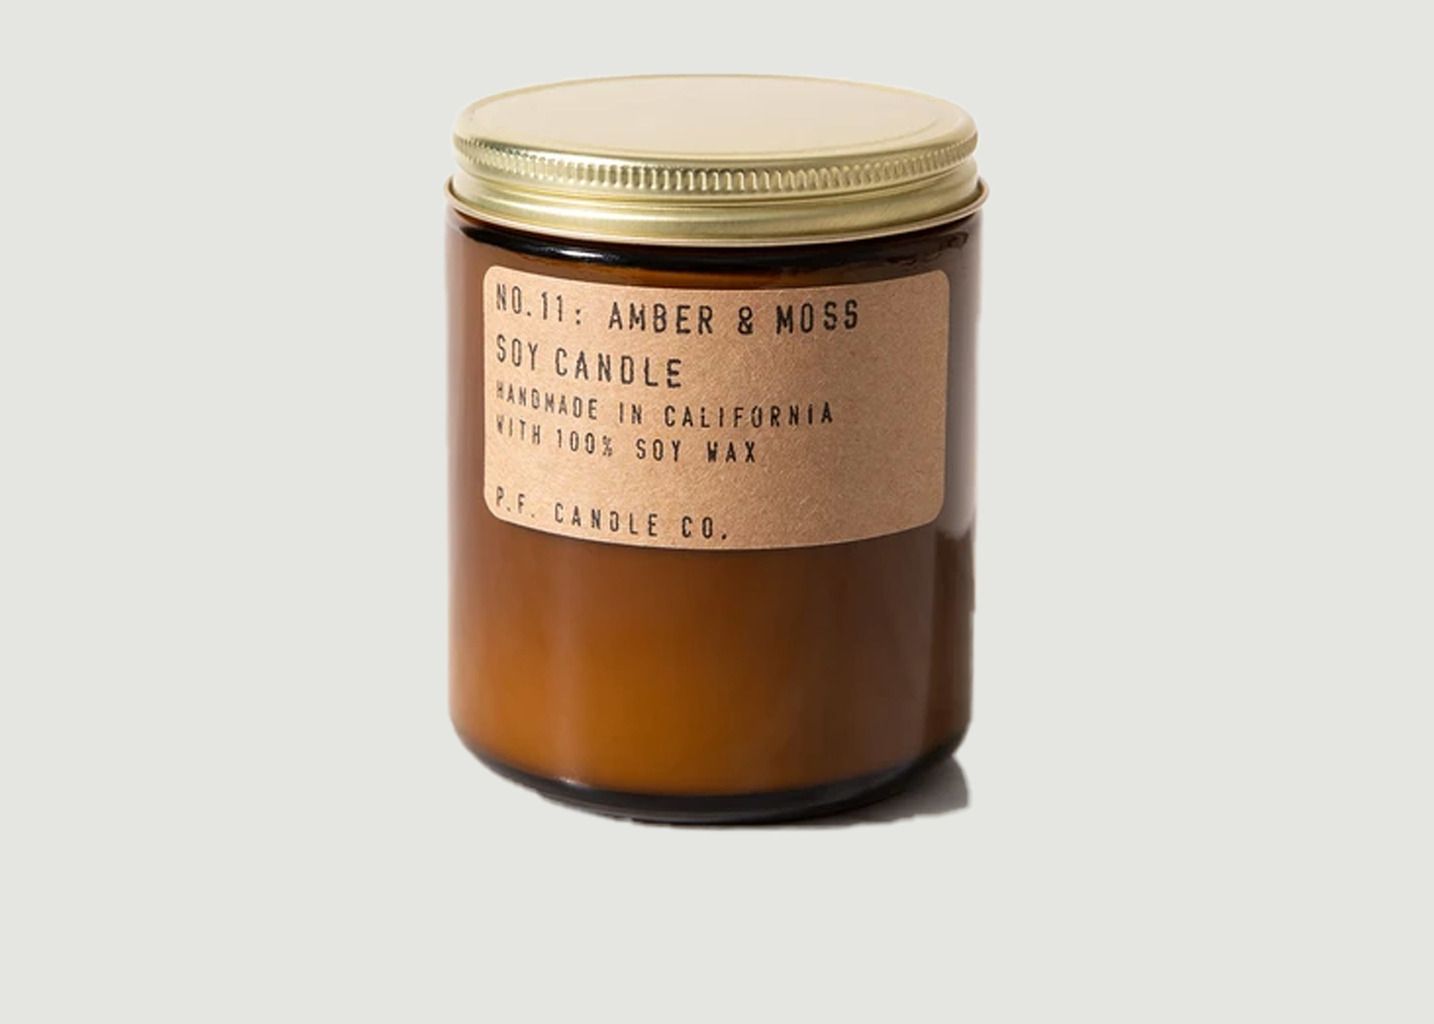 Bougie n°11 Amber Moss standard - P.F. Candle CO.